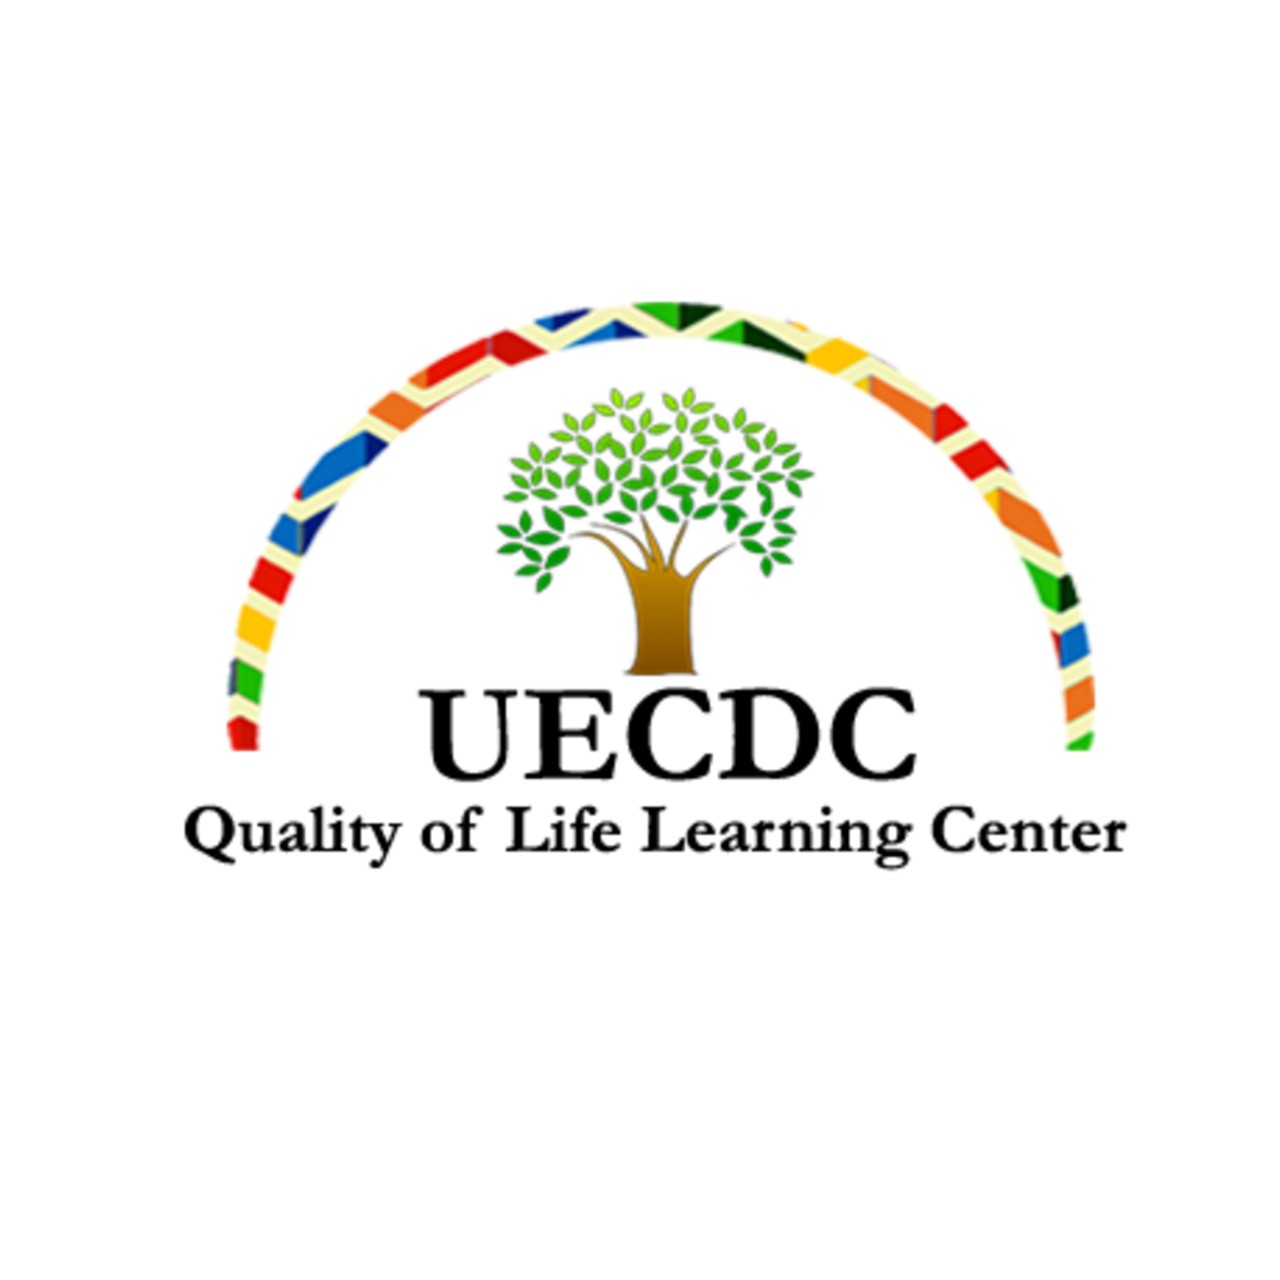 Quality of life learning center